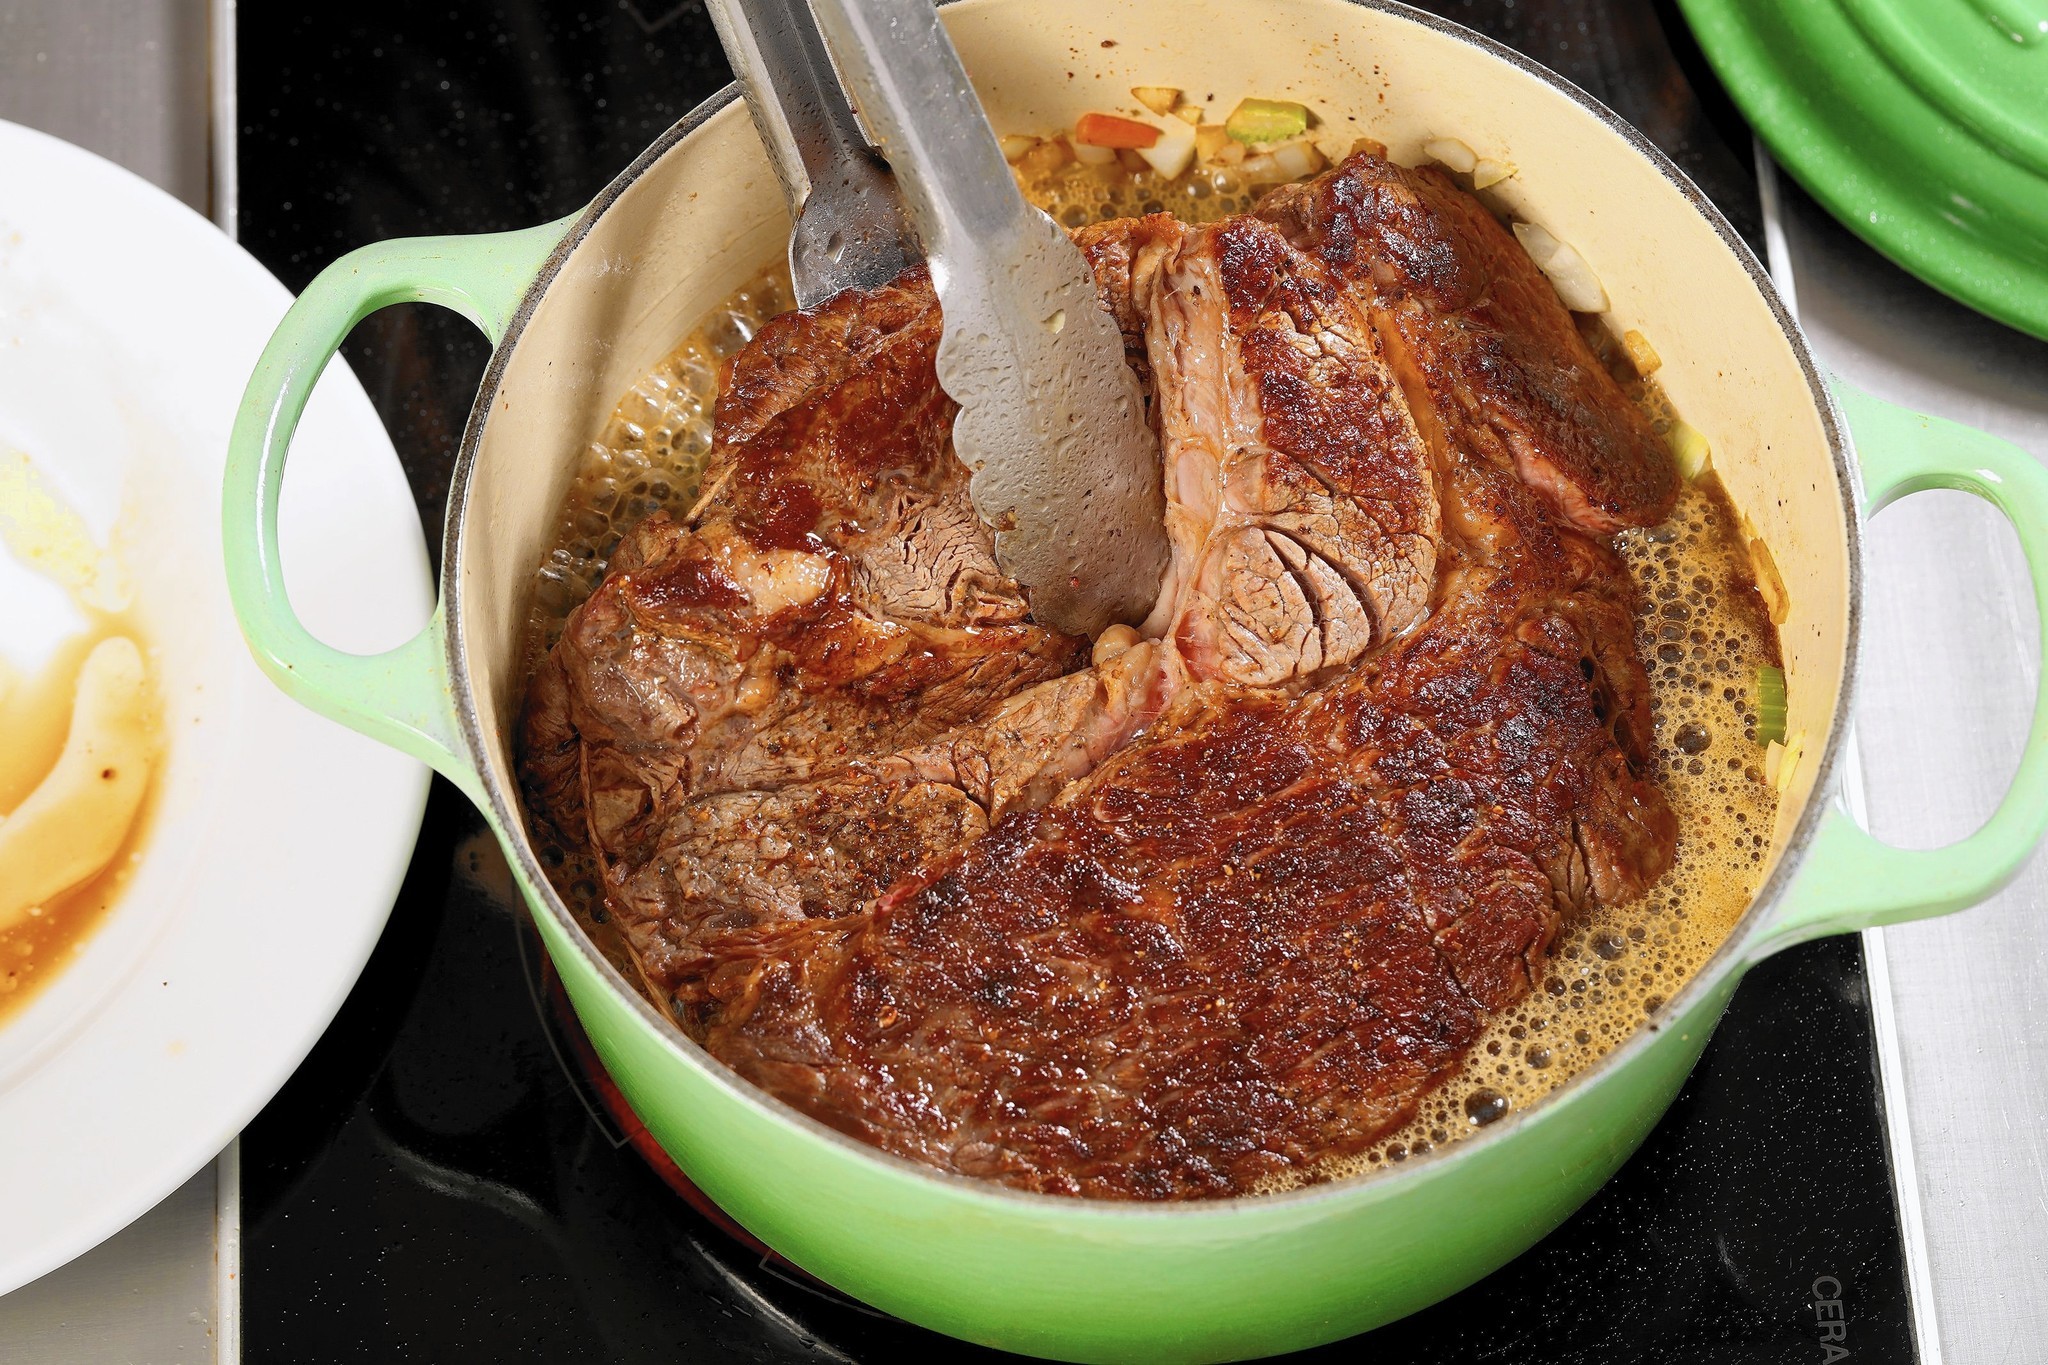 Braising Meat Makes Tough Cuts Savory and Tender - The New York Times